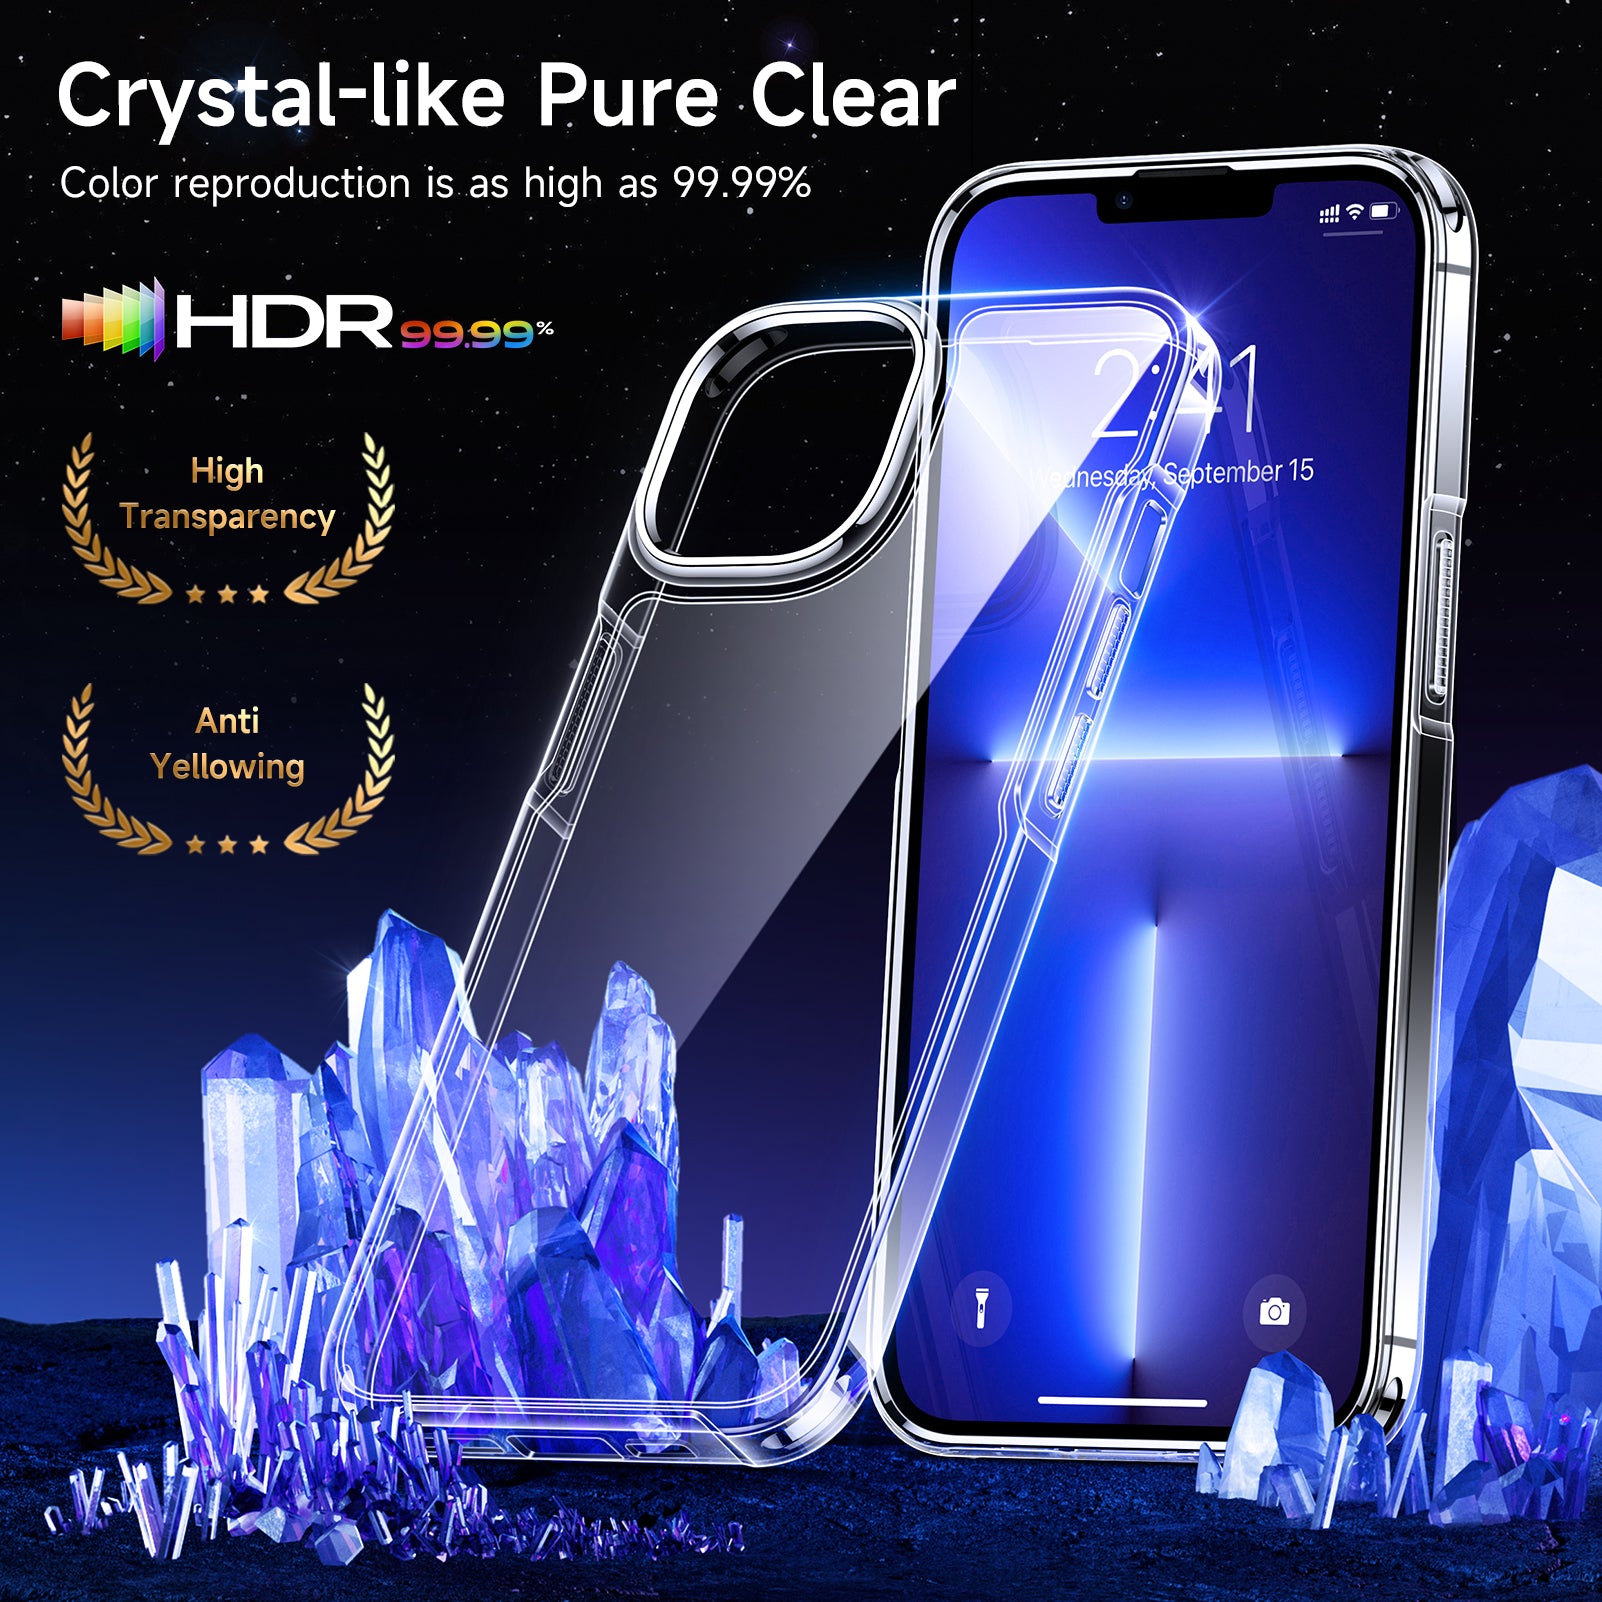 Black/Crystal Clear & 5 in 1 Full Body Protection